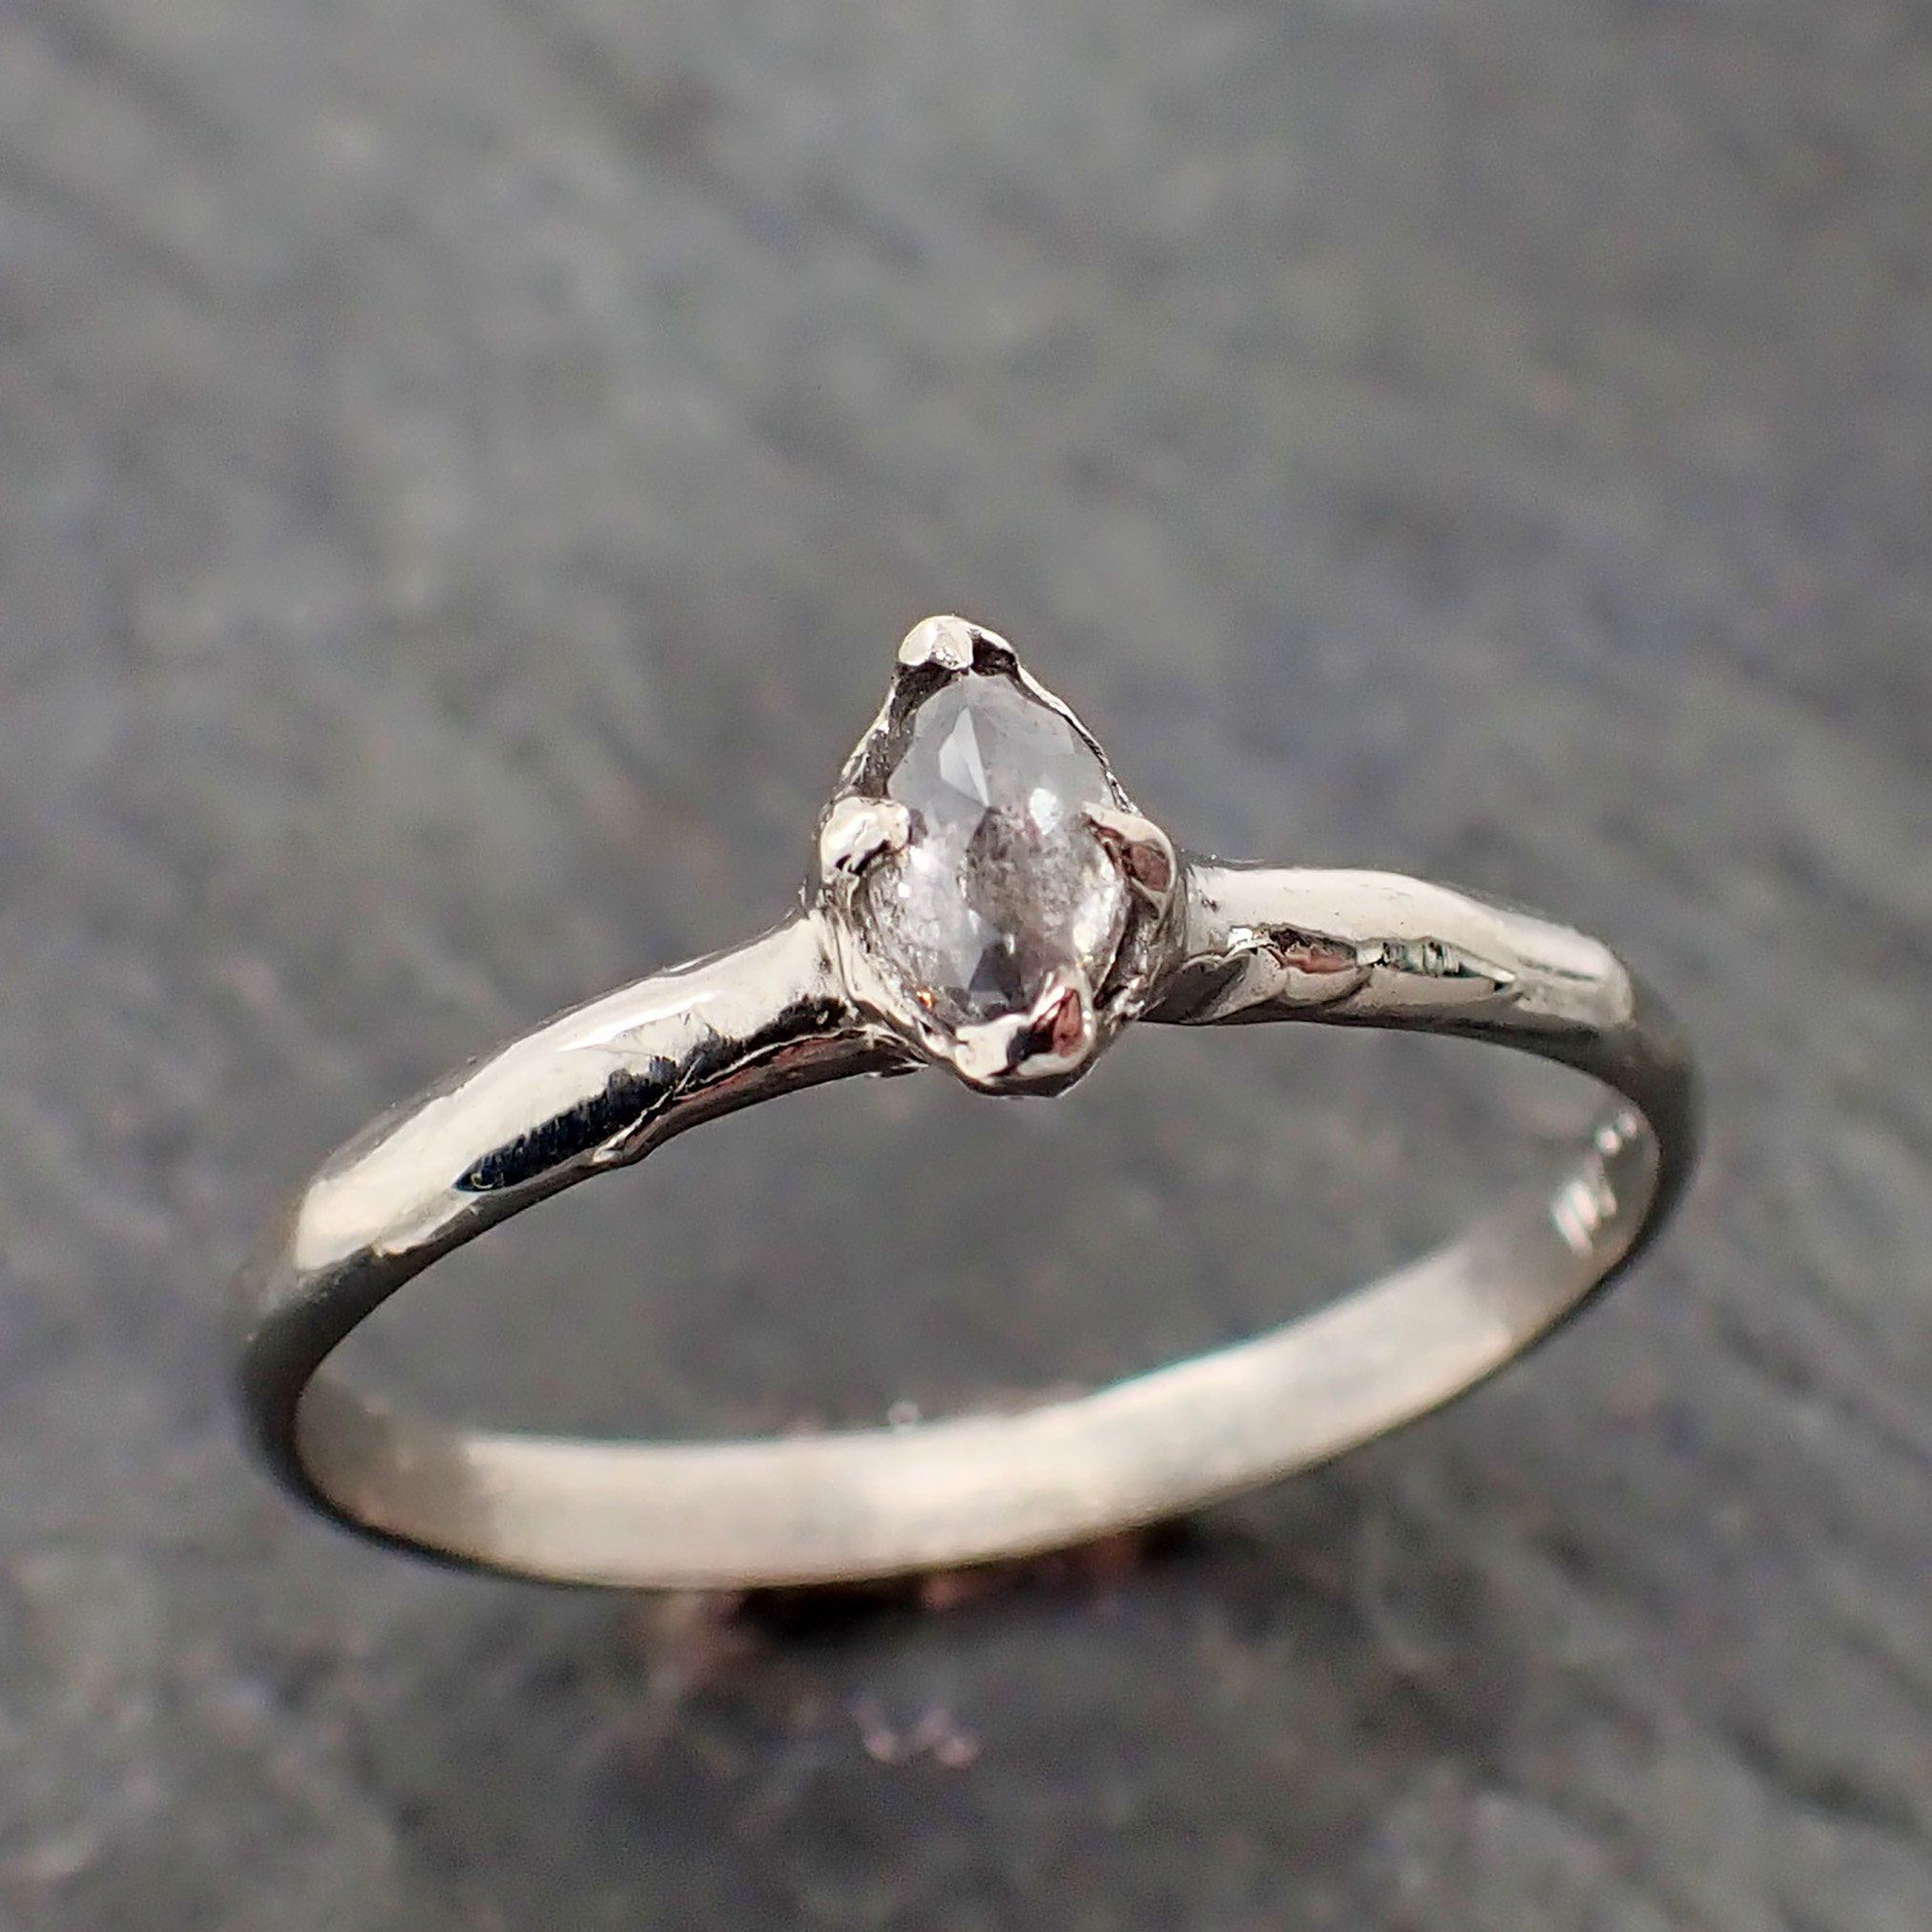 Faceted Fancy cut white Diamond Solitaire Engagement 14k White Gold Wedding Ring byAngeline 2182